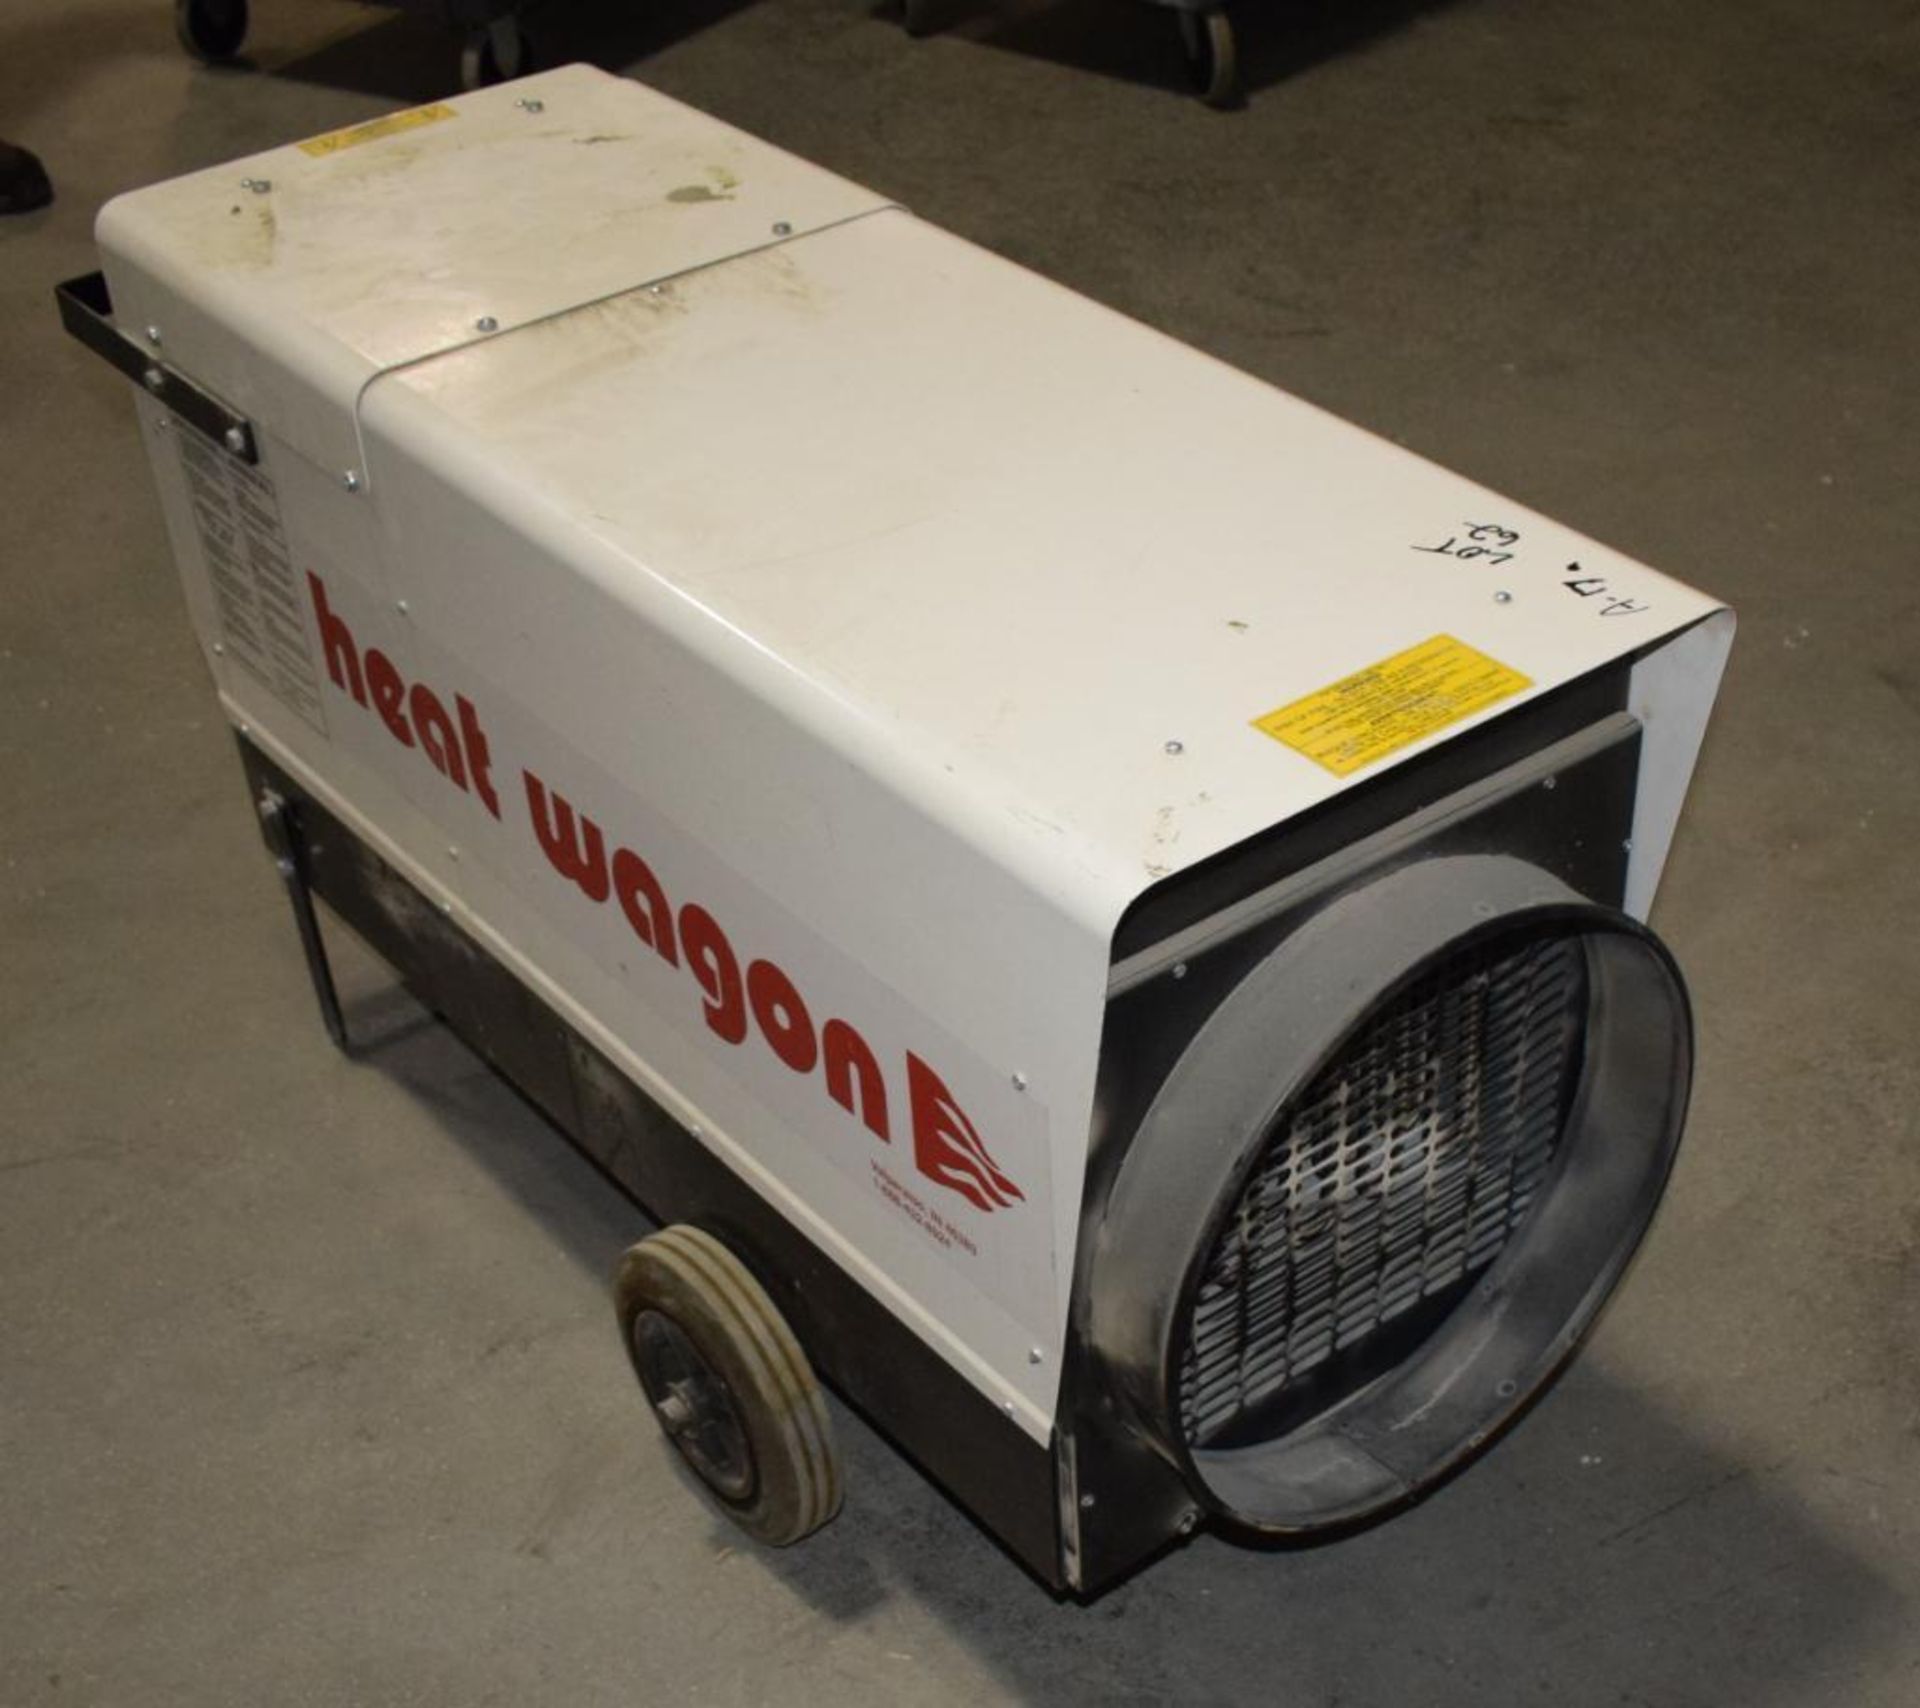 Heatwagon 60E Movable Air Heater, Model P6000, Serial# 406019-0664. - Image 2 of 4